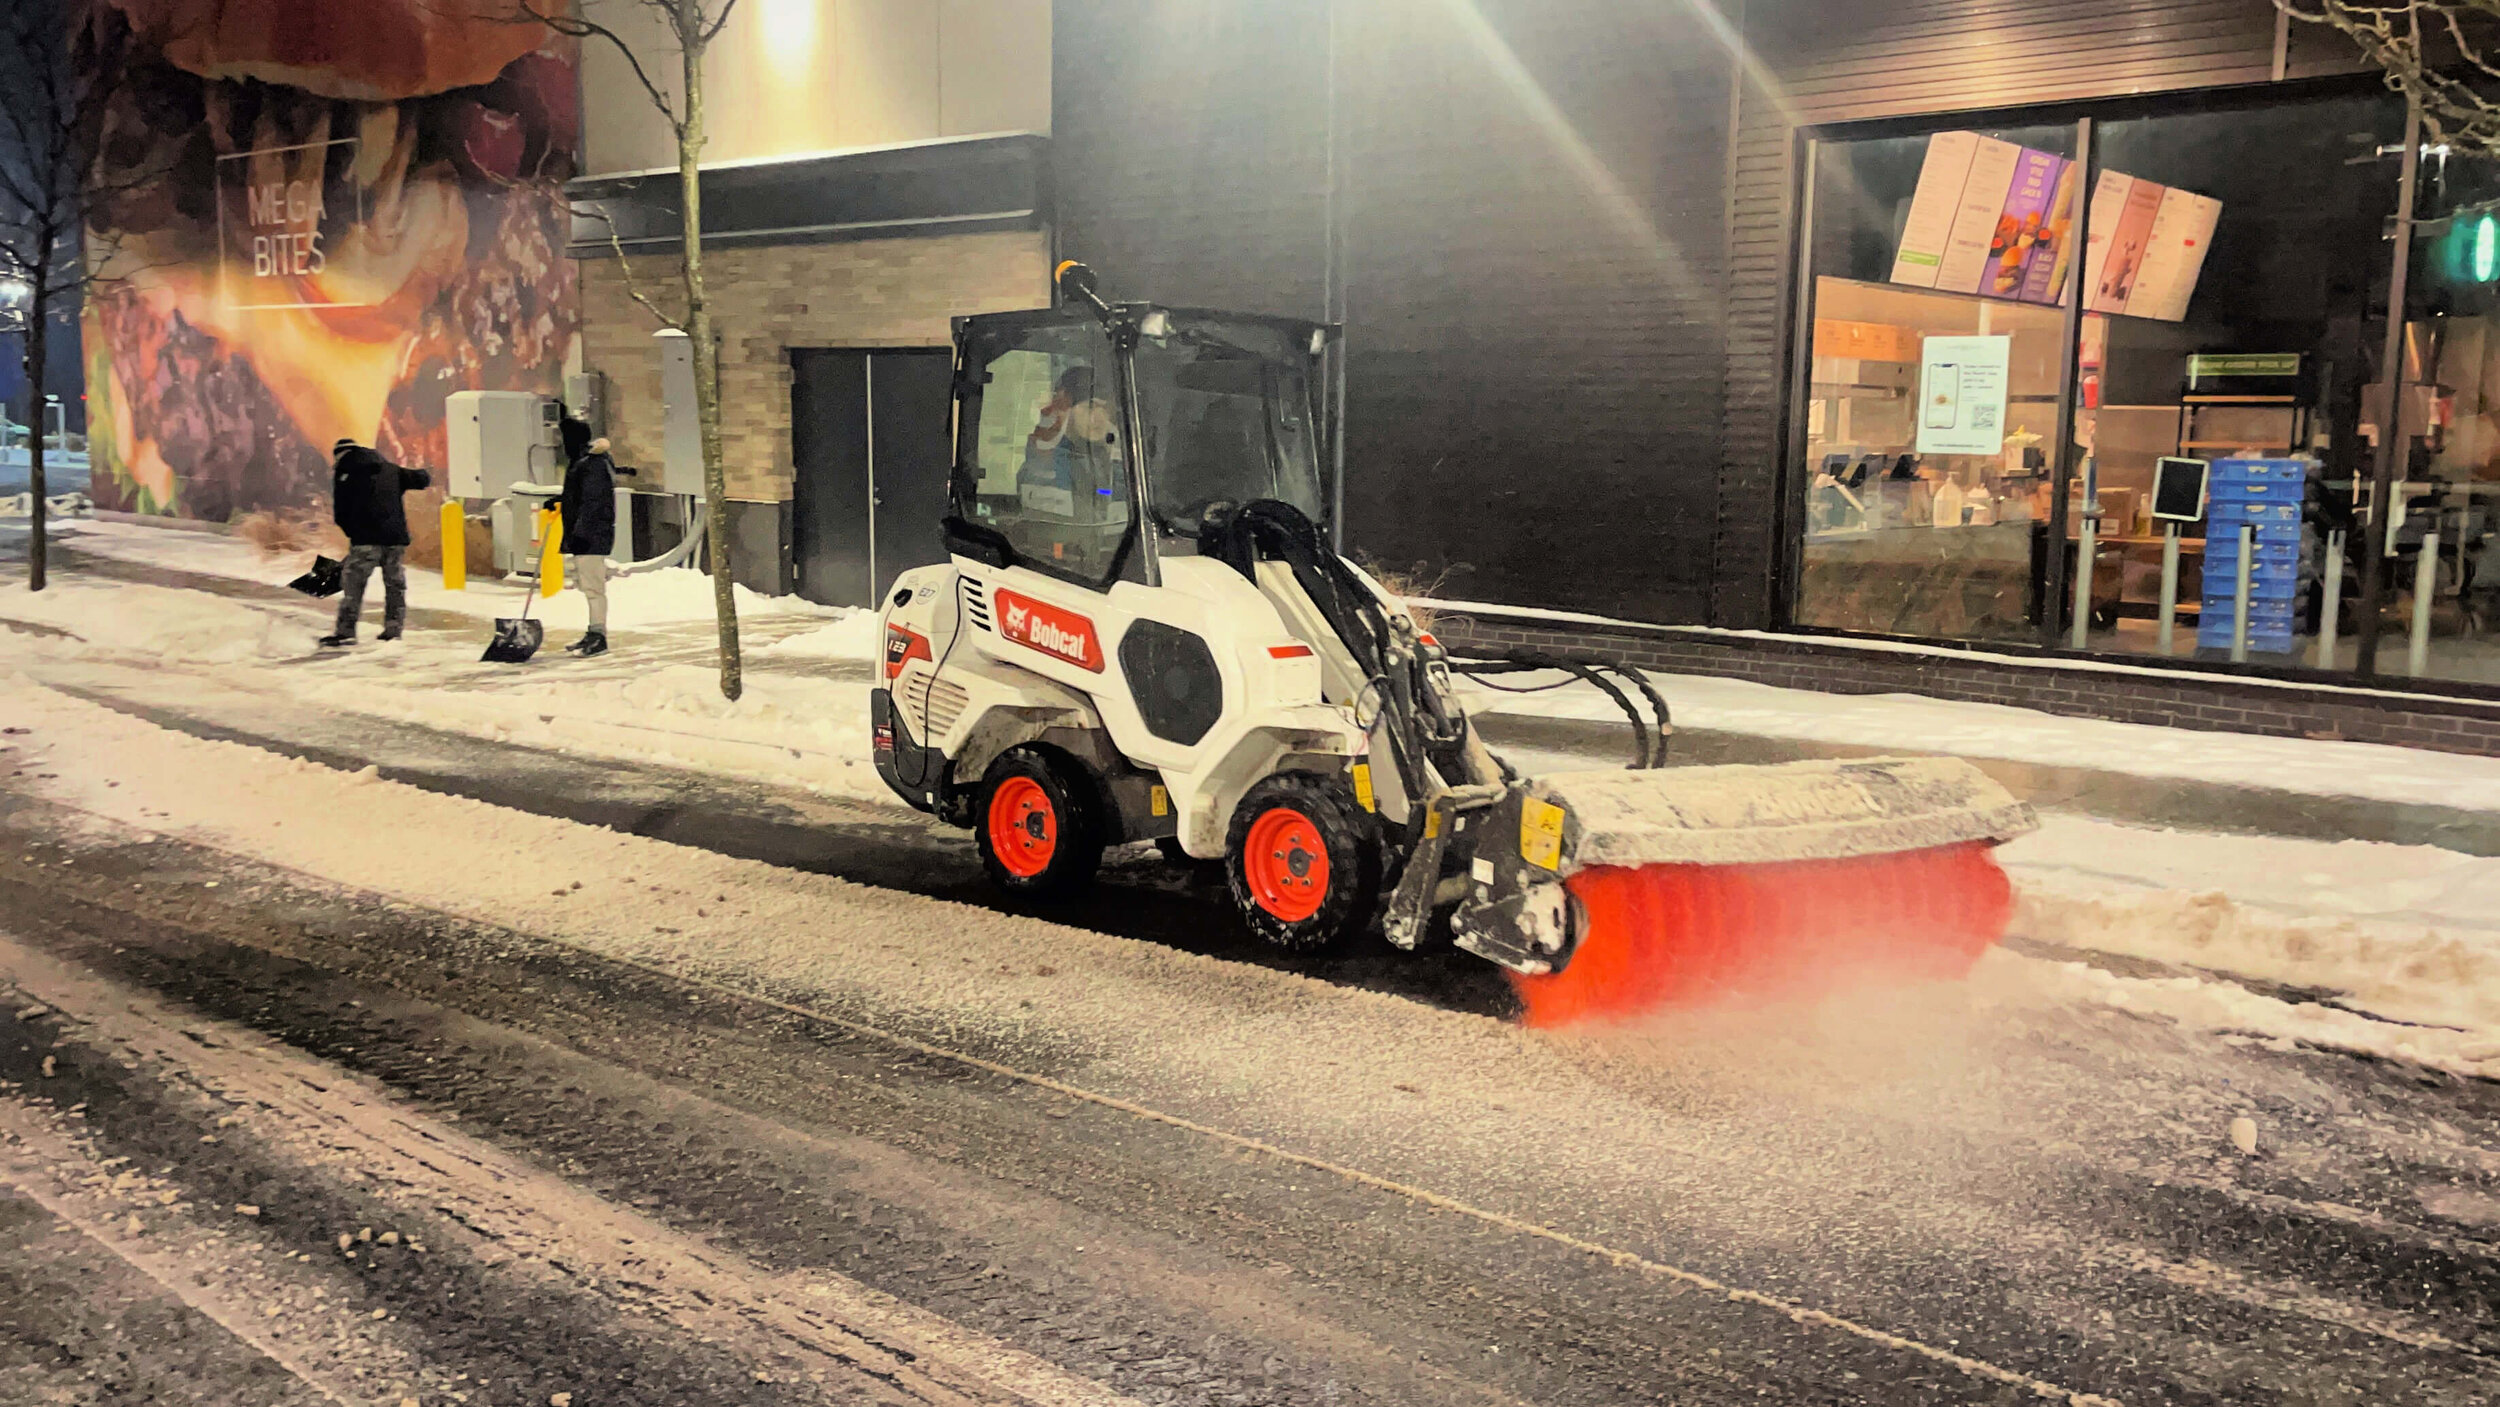 Dedicated Sidewalk Crews With Speciality Equipment